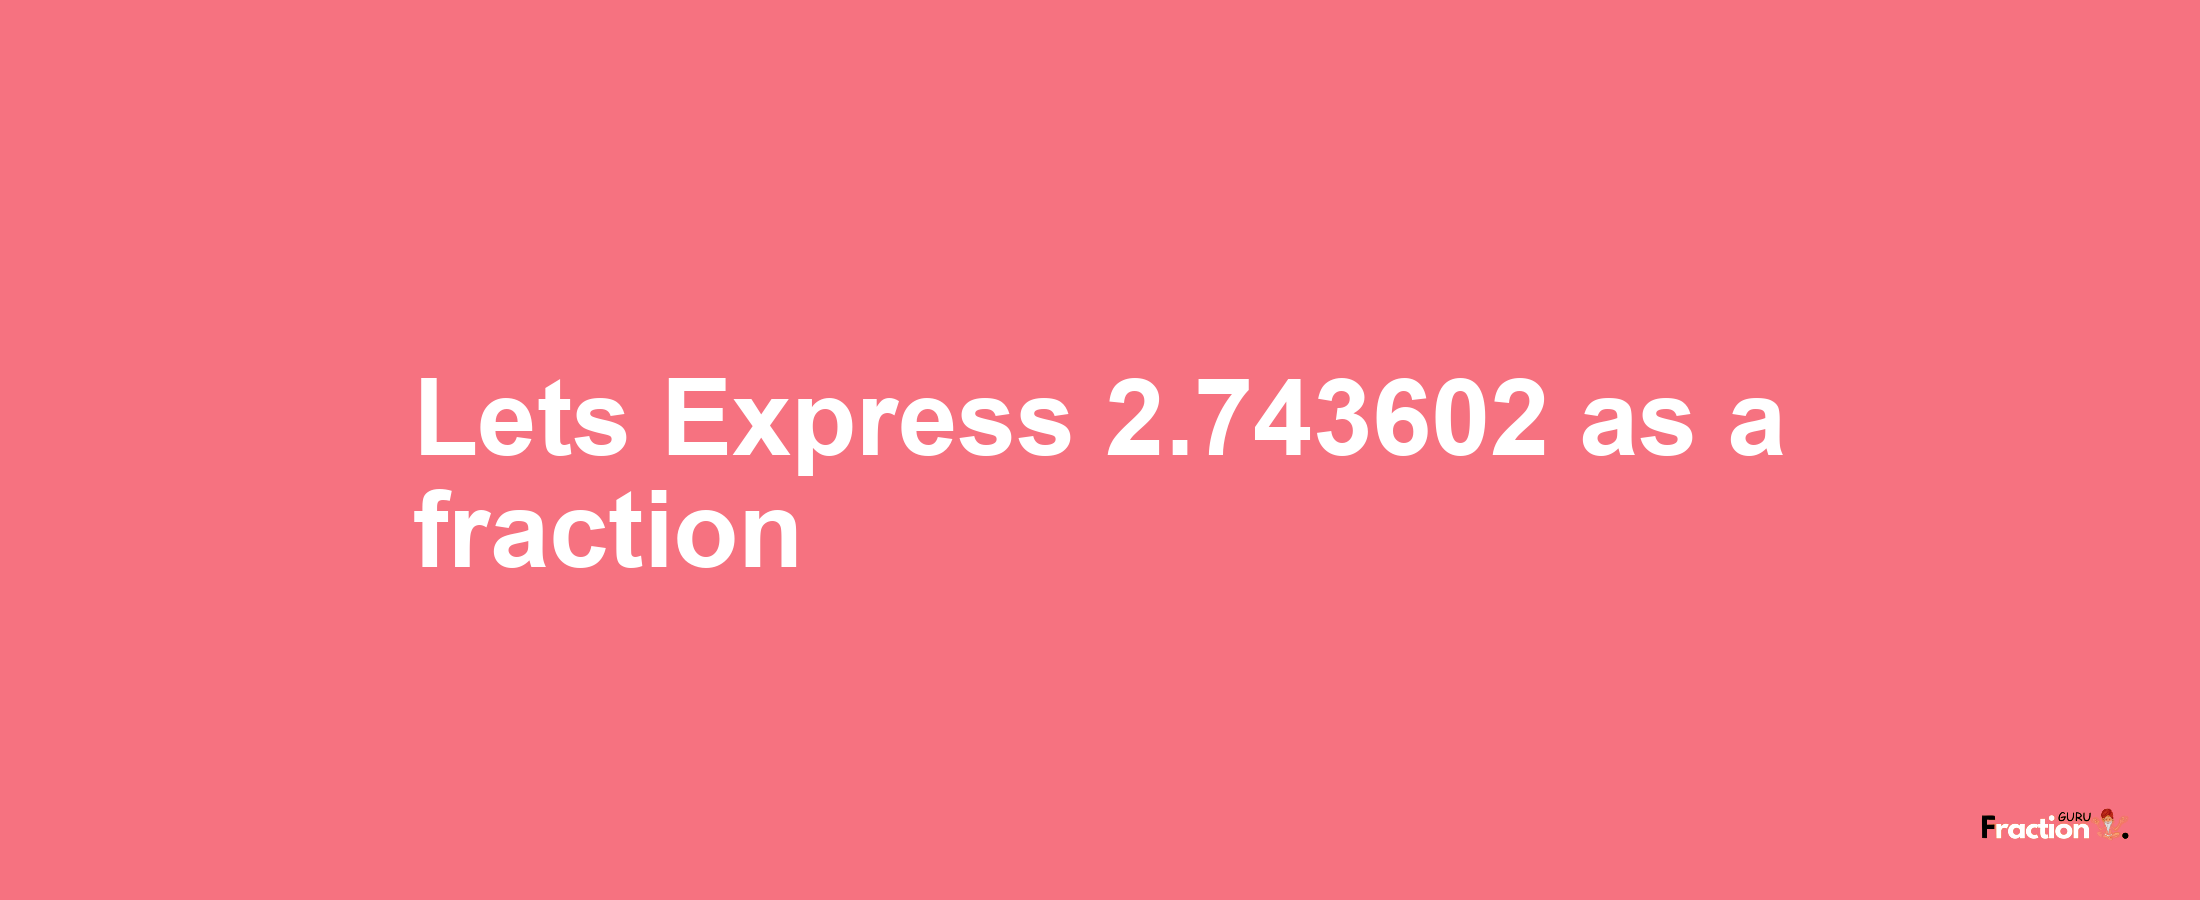 Lets Express 2.743602 as afraction